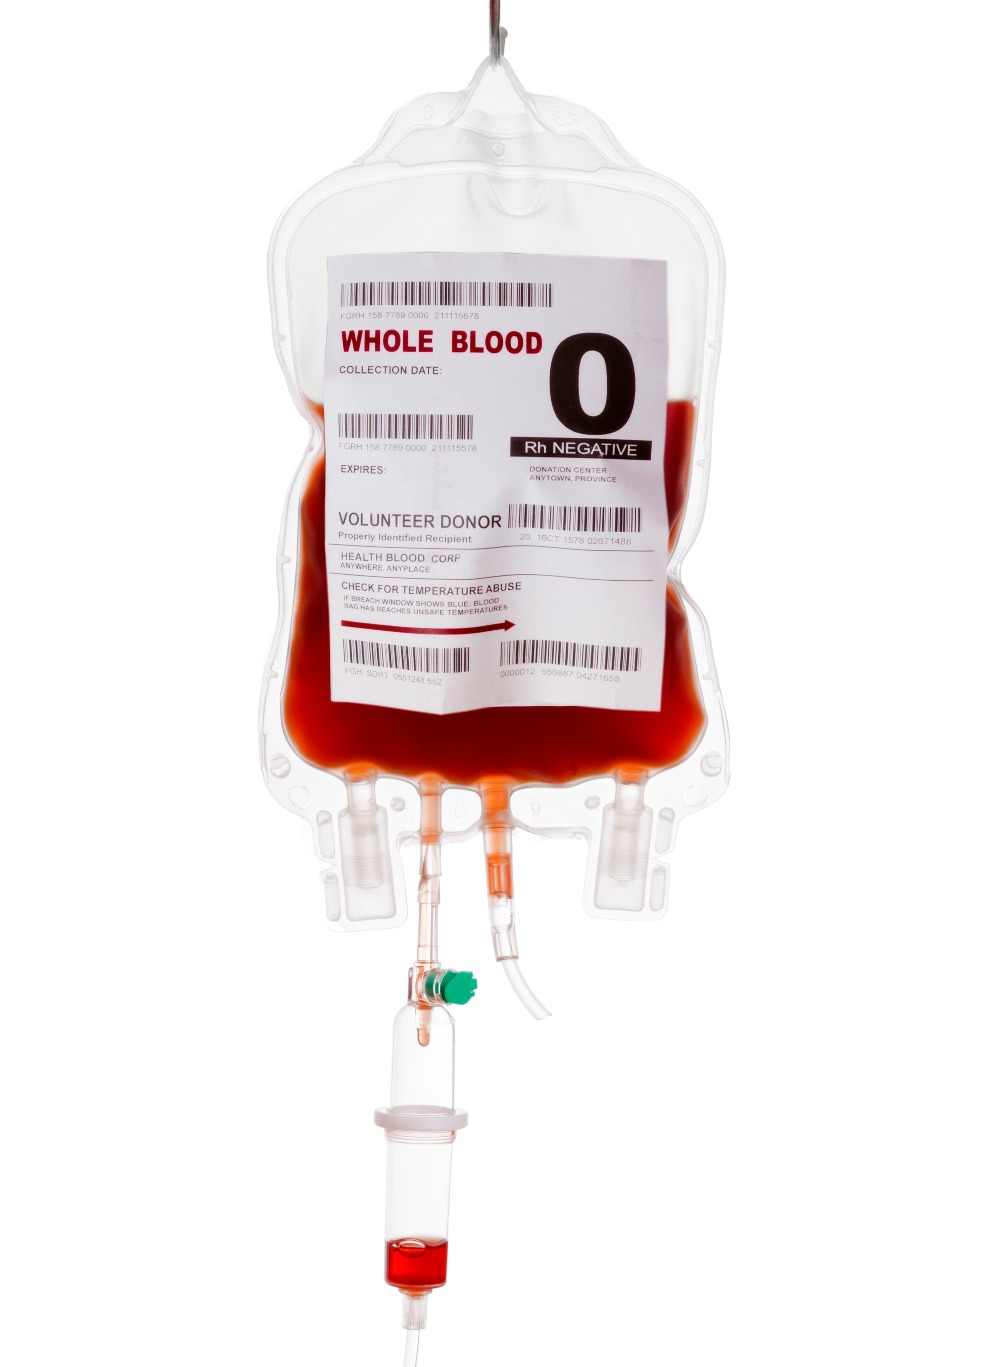 Photo of donated whole blood in bag